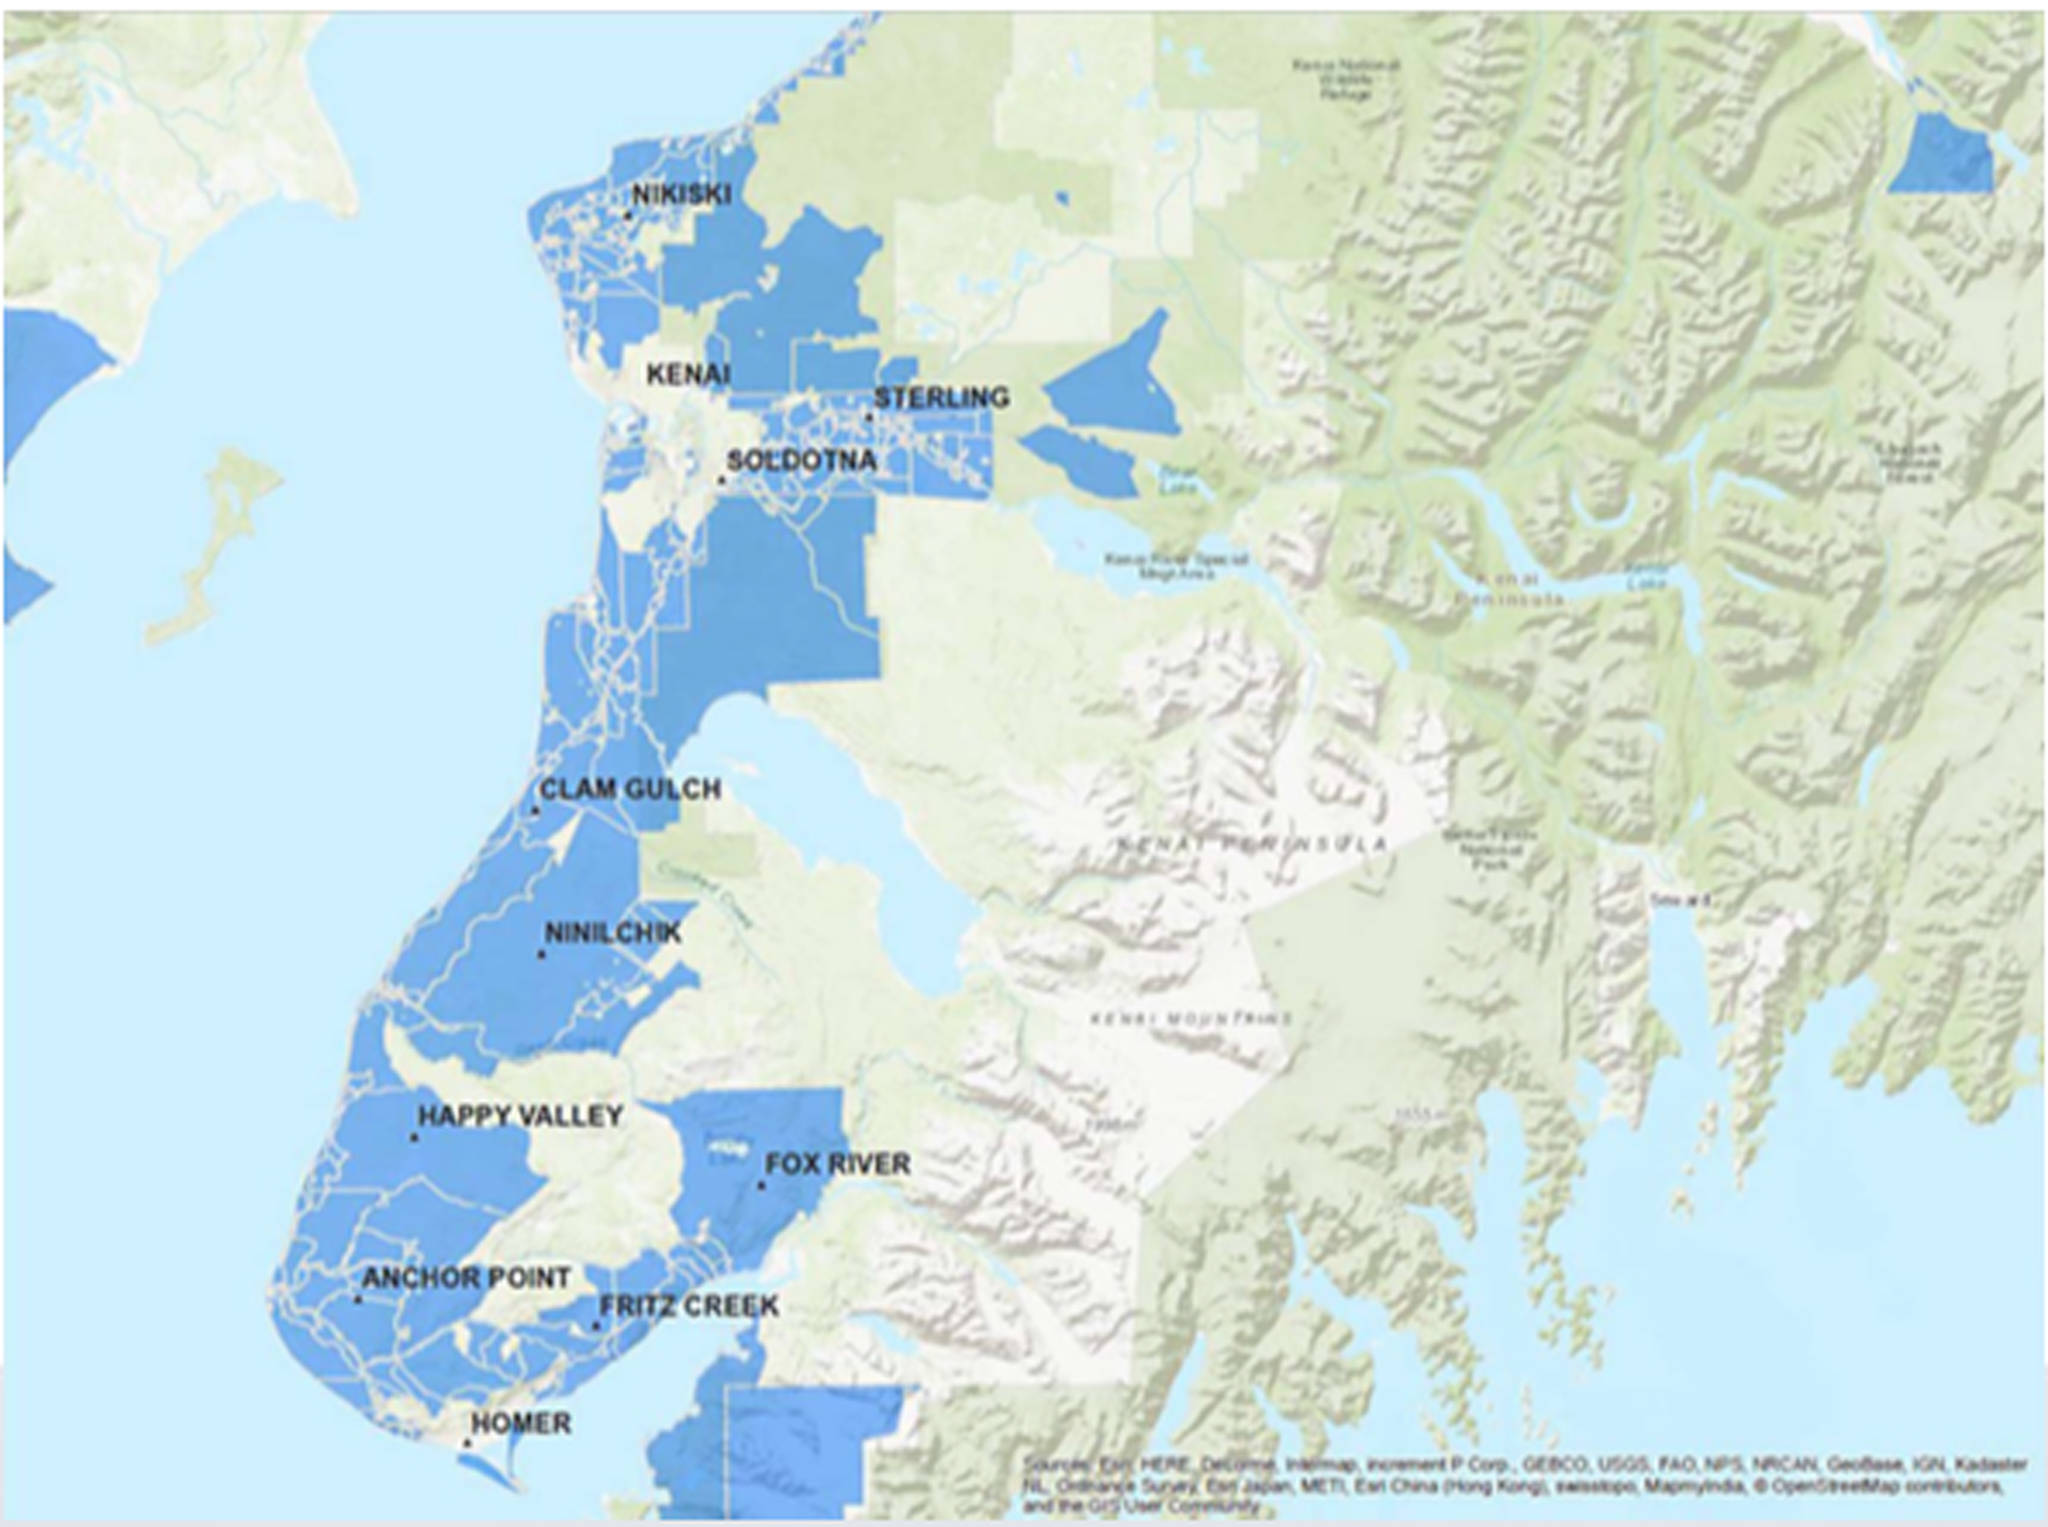 This map, taken from Alaska Communications’ presentation to the Kenai Peninsula Borough Assembly on Tuesday, Aug. 15, 2017, shows the areas eligible for broadband expansion with the funding Alaska Communications received from the Federal Communications Commission. The company plans to expand its broadband internet services on the Kenai Peninsula in stages from 2018&